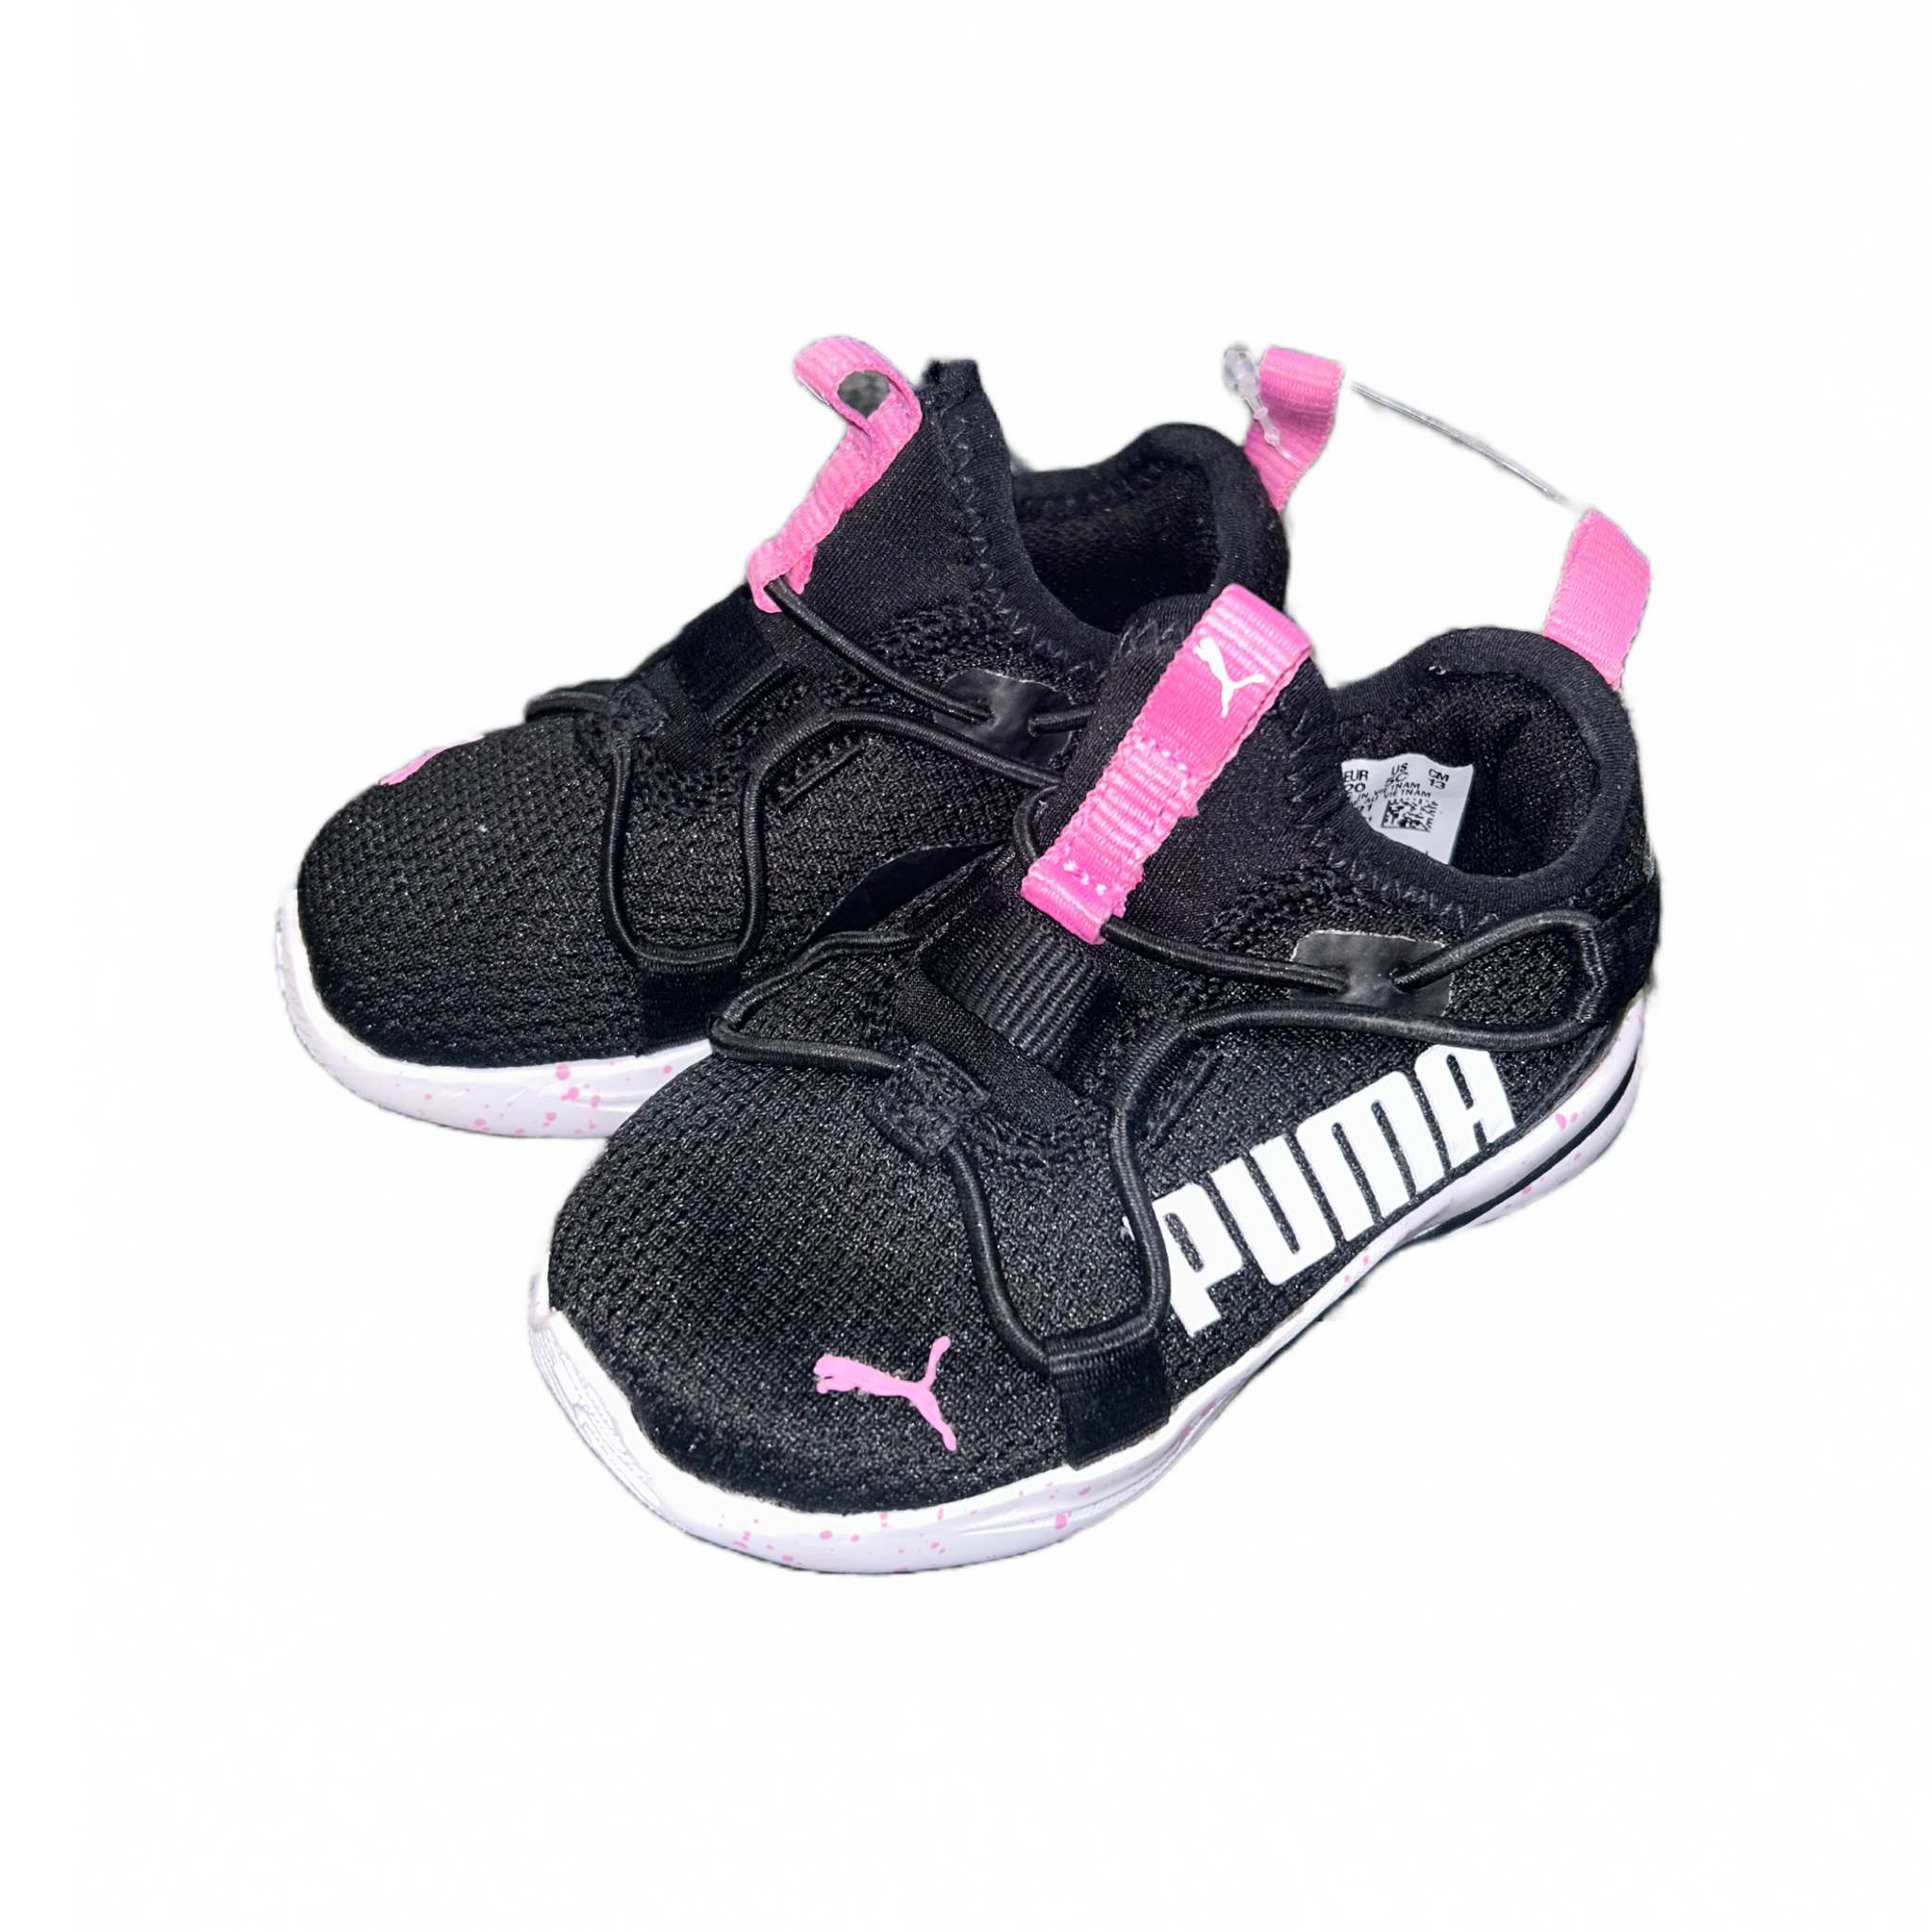 Sneakers by Puma size 5c